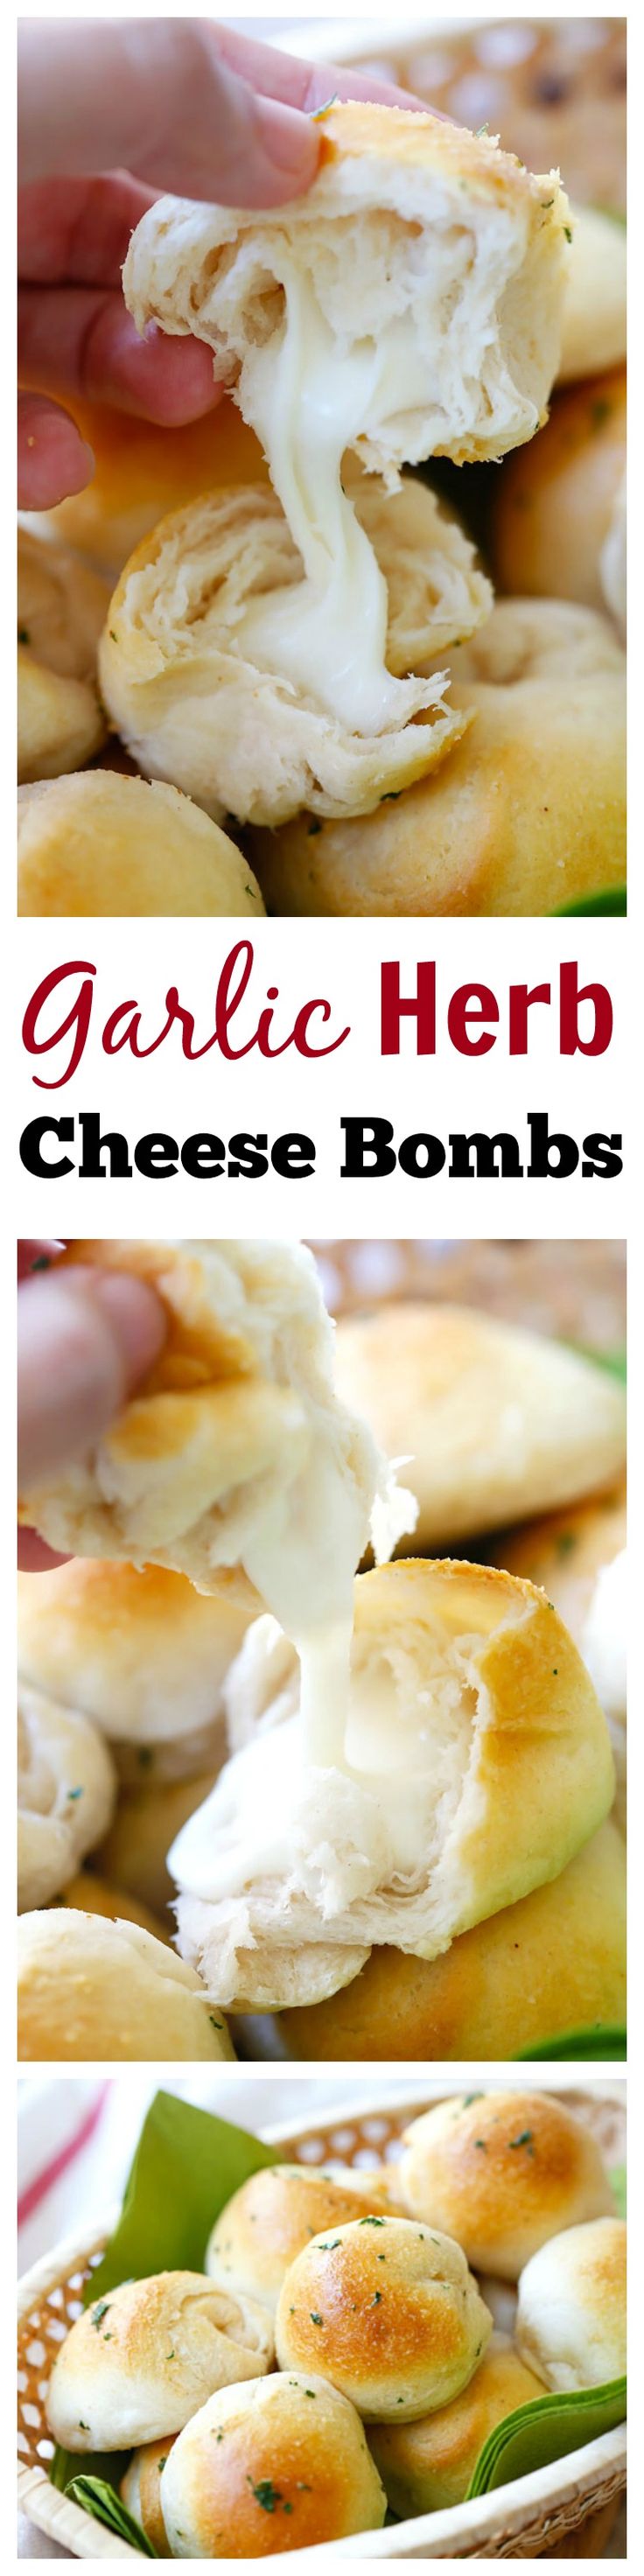 Garlic Herb Cheese Bombs – amazing cheese bomb biscuits loaded with Mozzarella cheese and topped with garlic herb butter. Easy recipe that takes 20 mins. | rasamalaysia.com